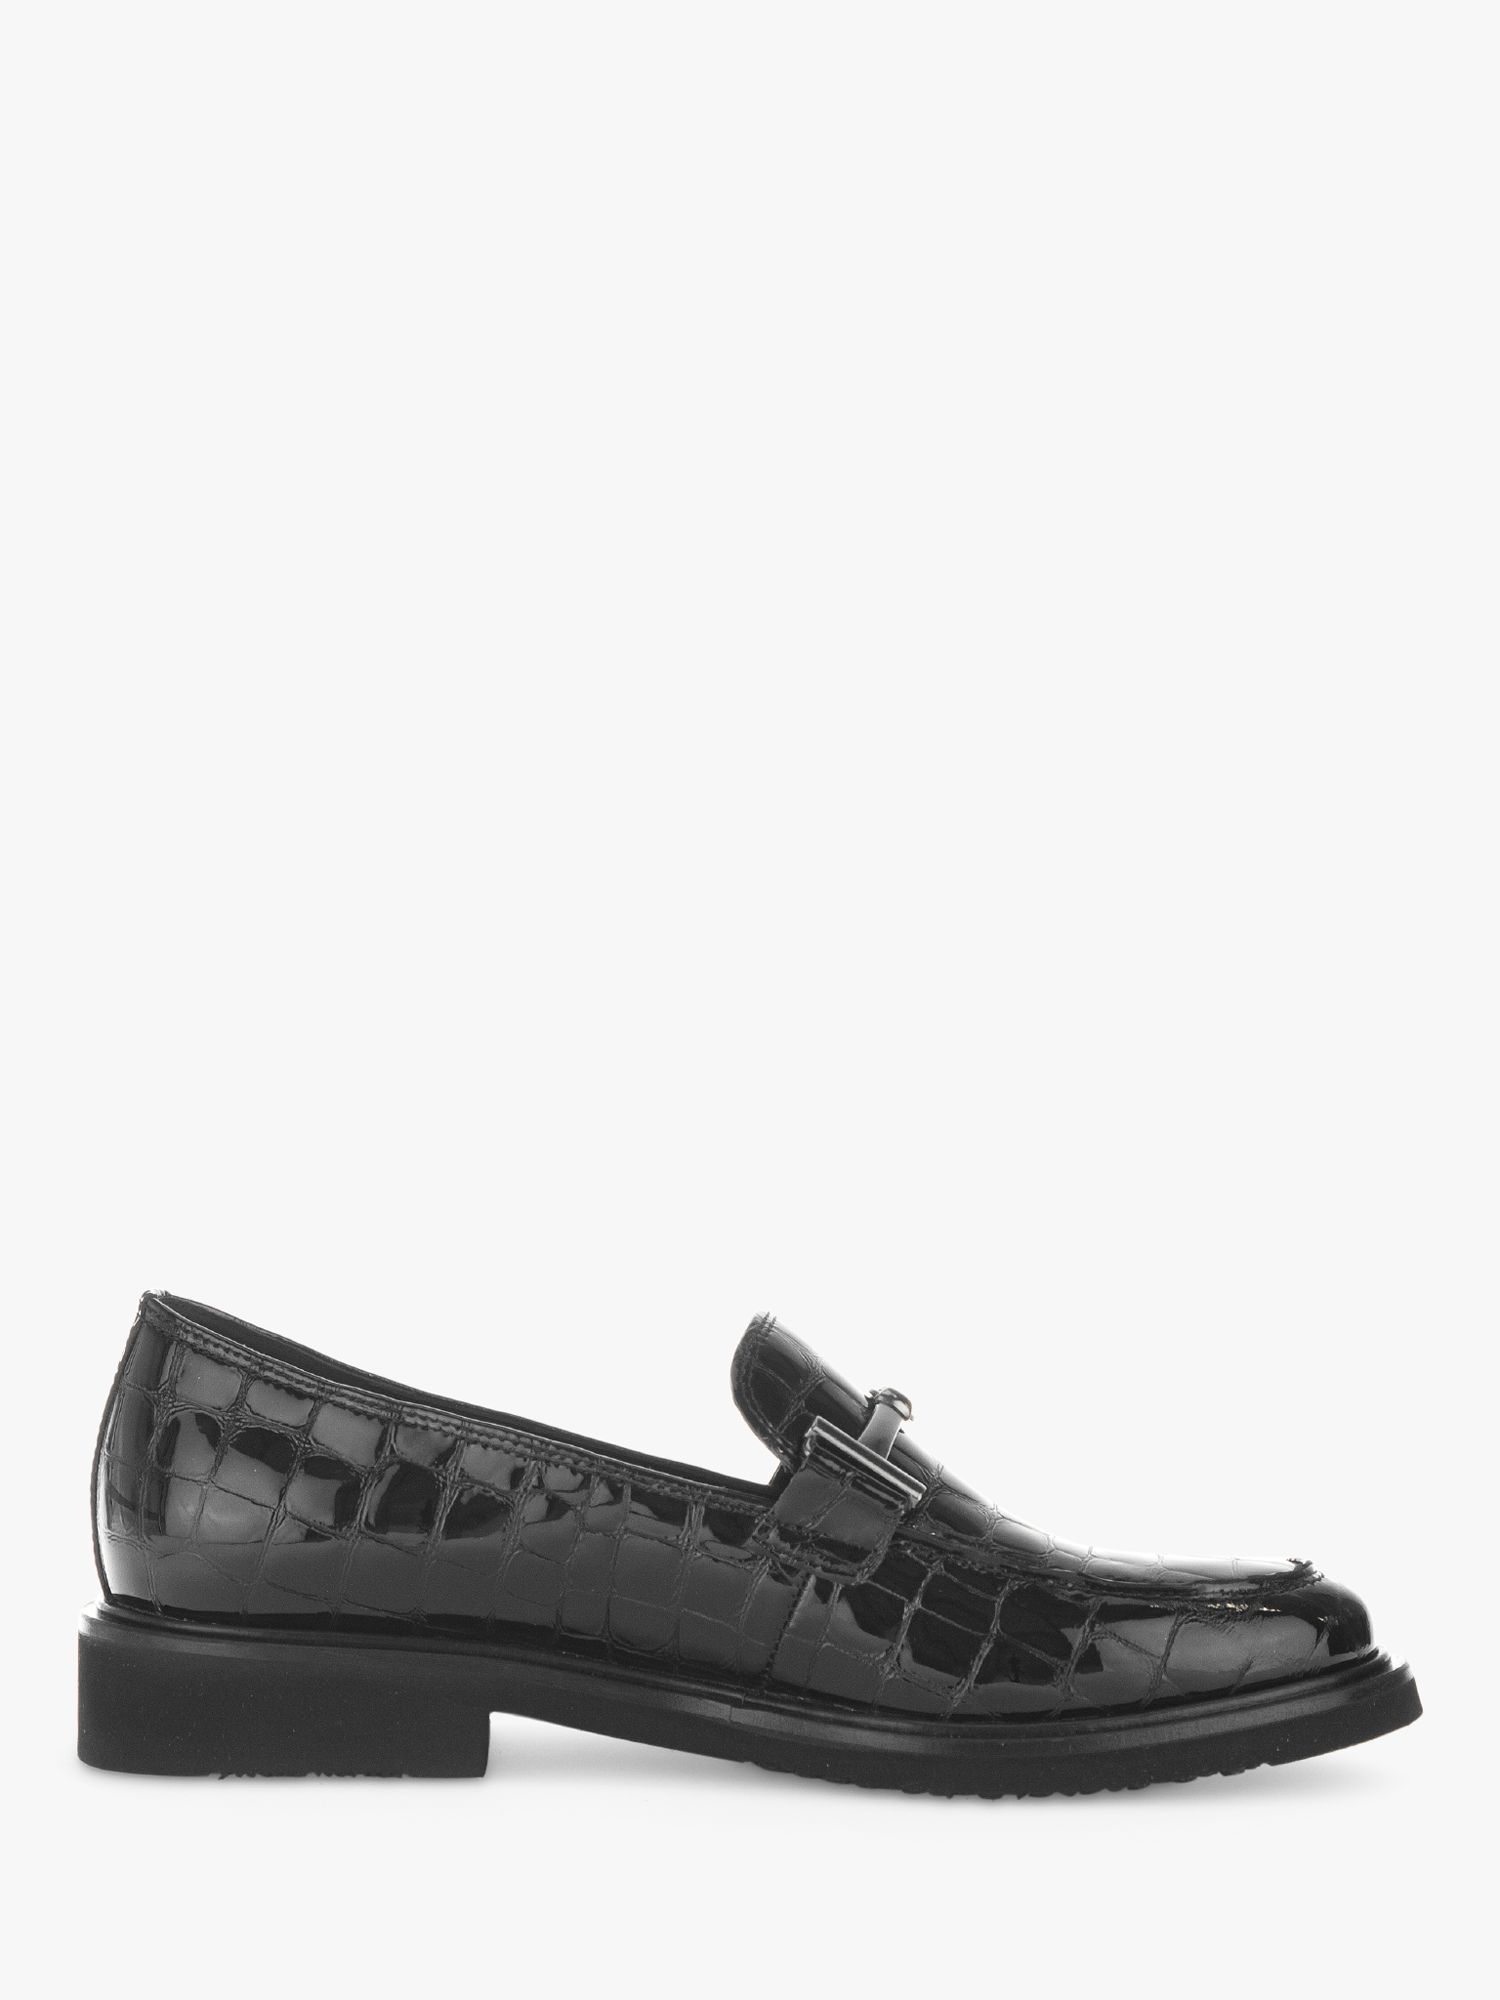 Gabor Layne Patent Leather Croc Effect Loafers, Black at John Lewis ...